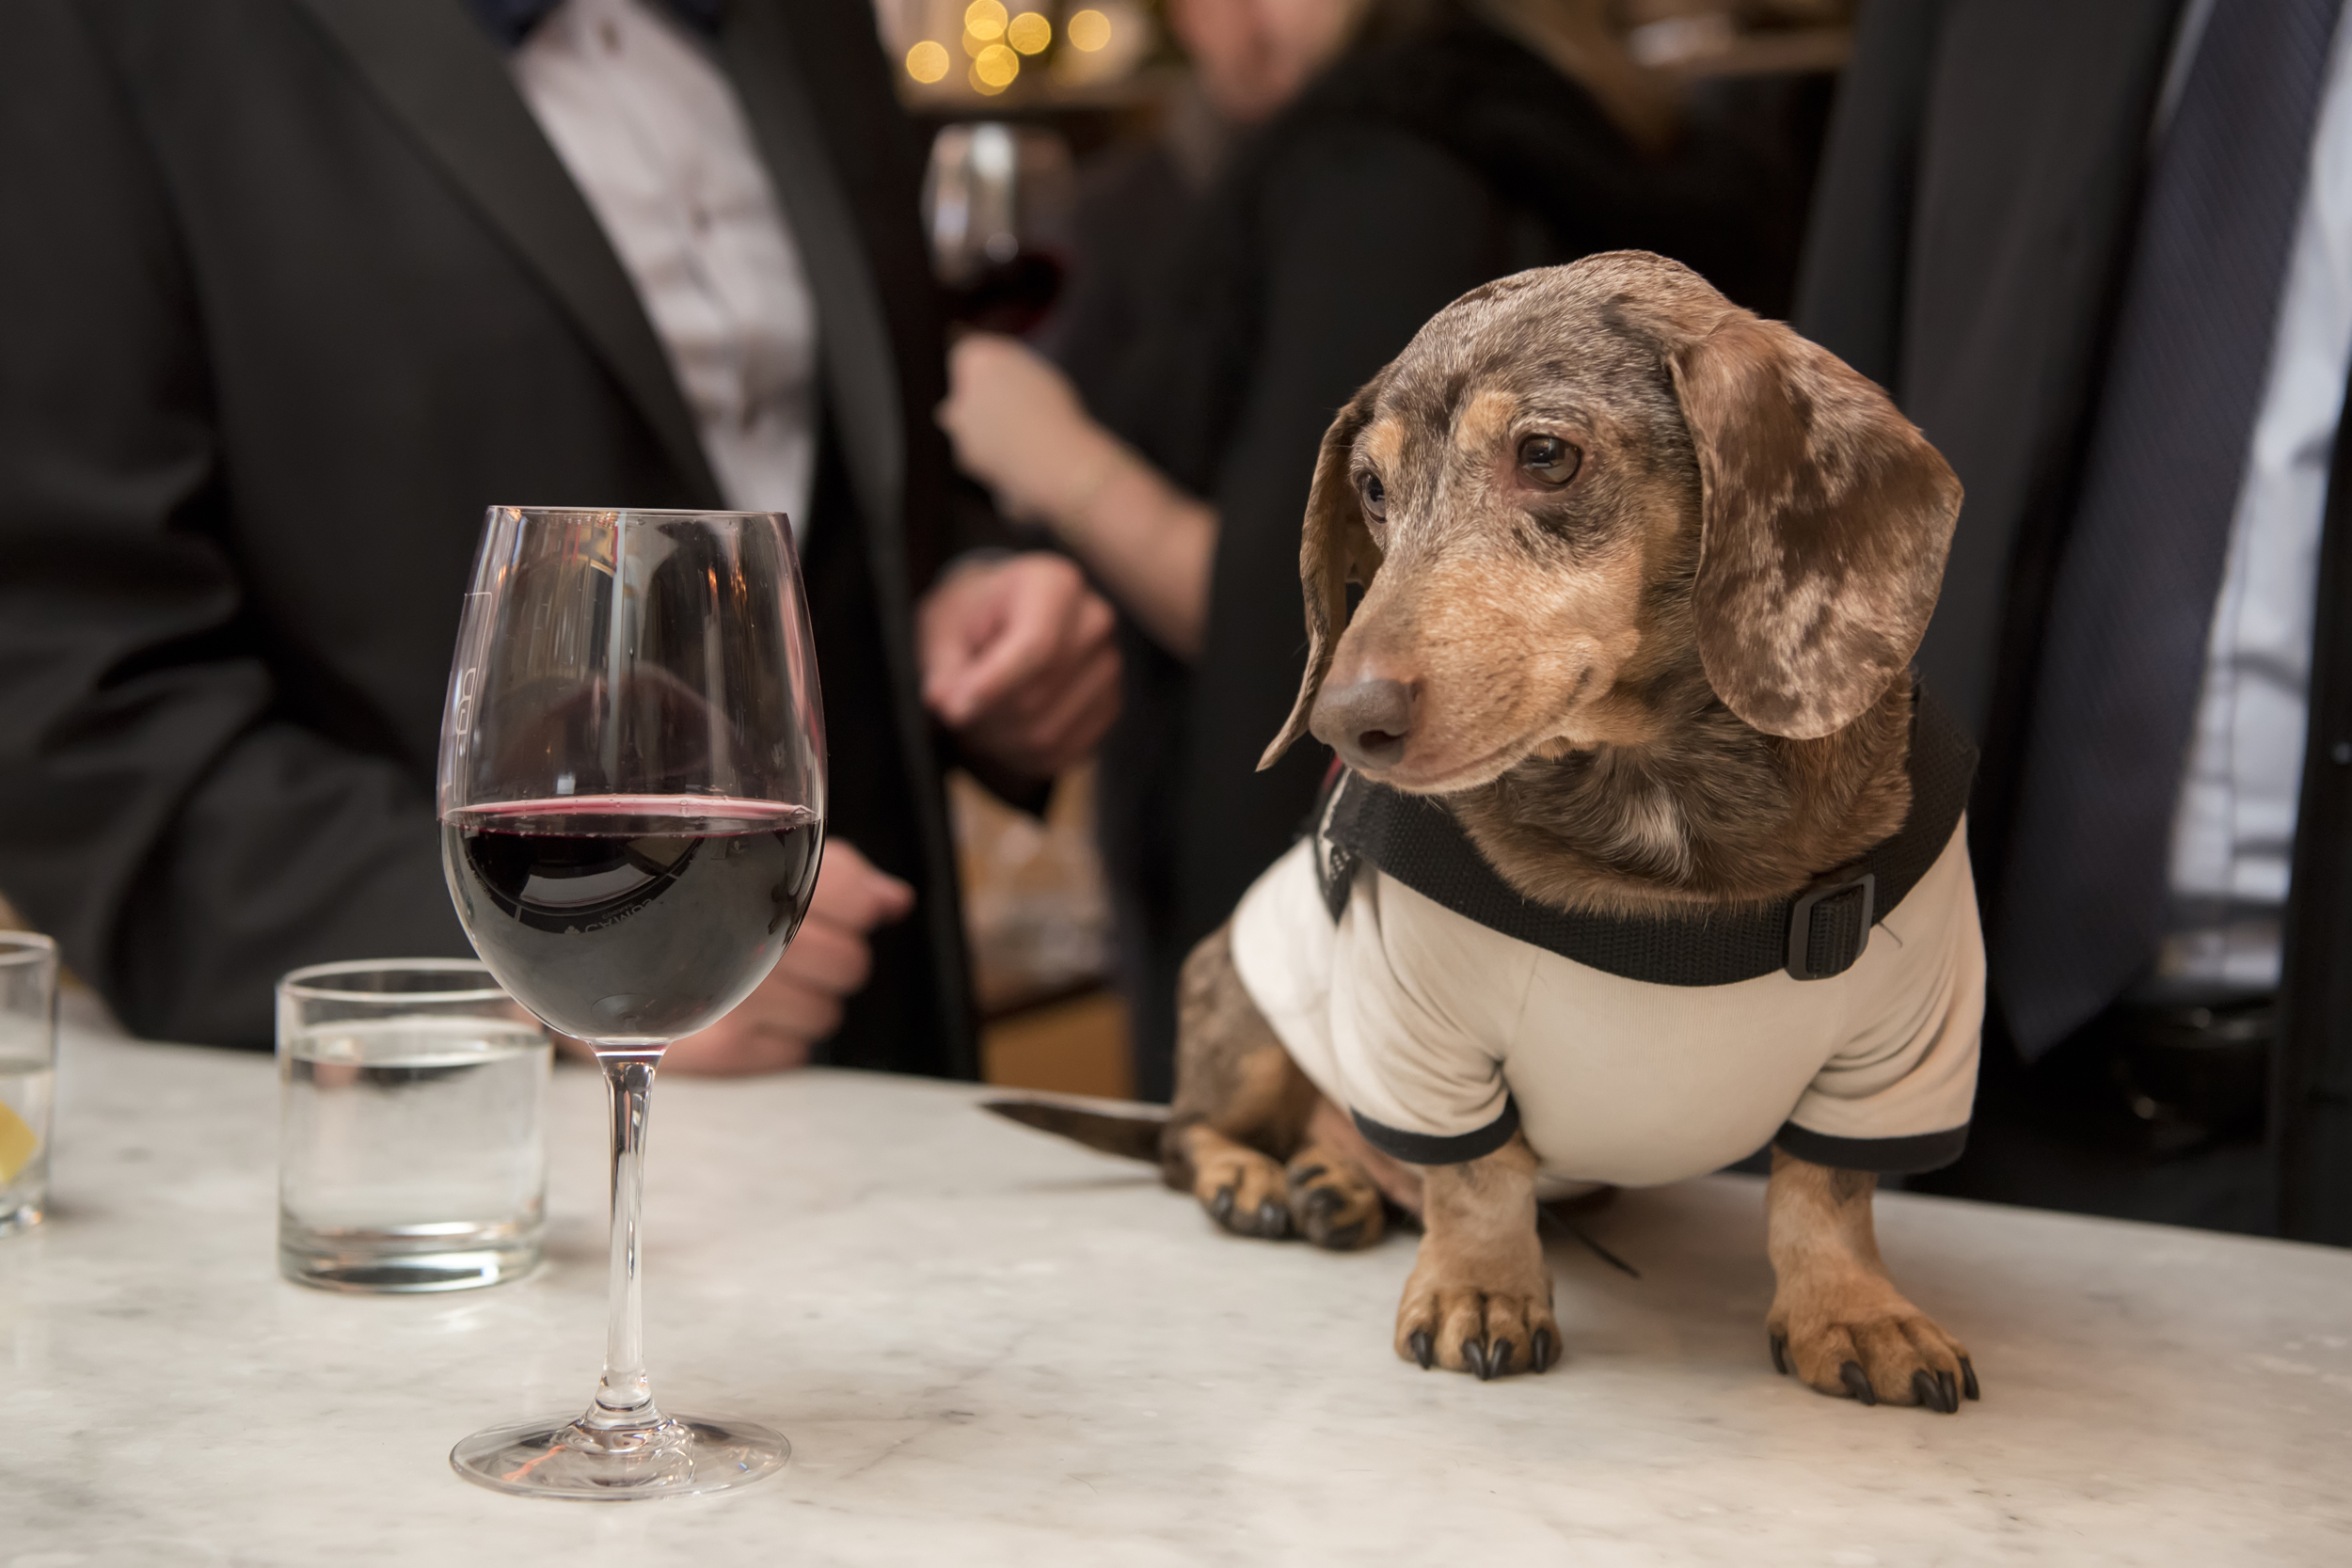 A dachshund wearing a tuxedo shirt stands on a dining table and looks longingly at a glass of red wine in a photo by Studio A Images